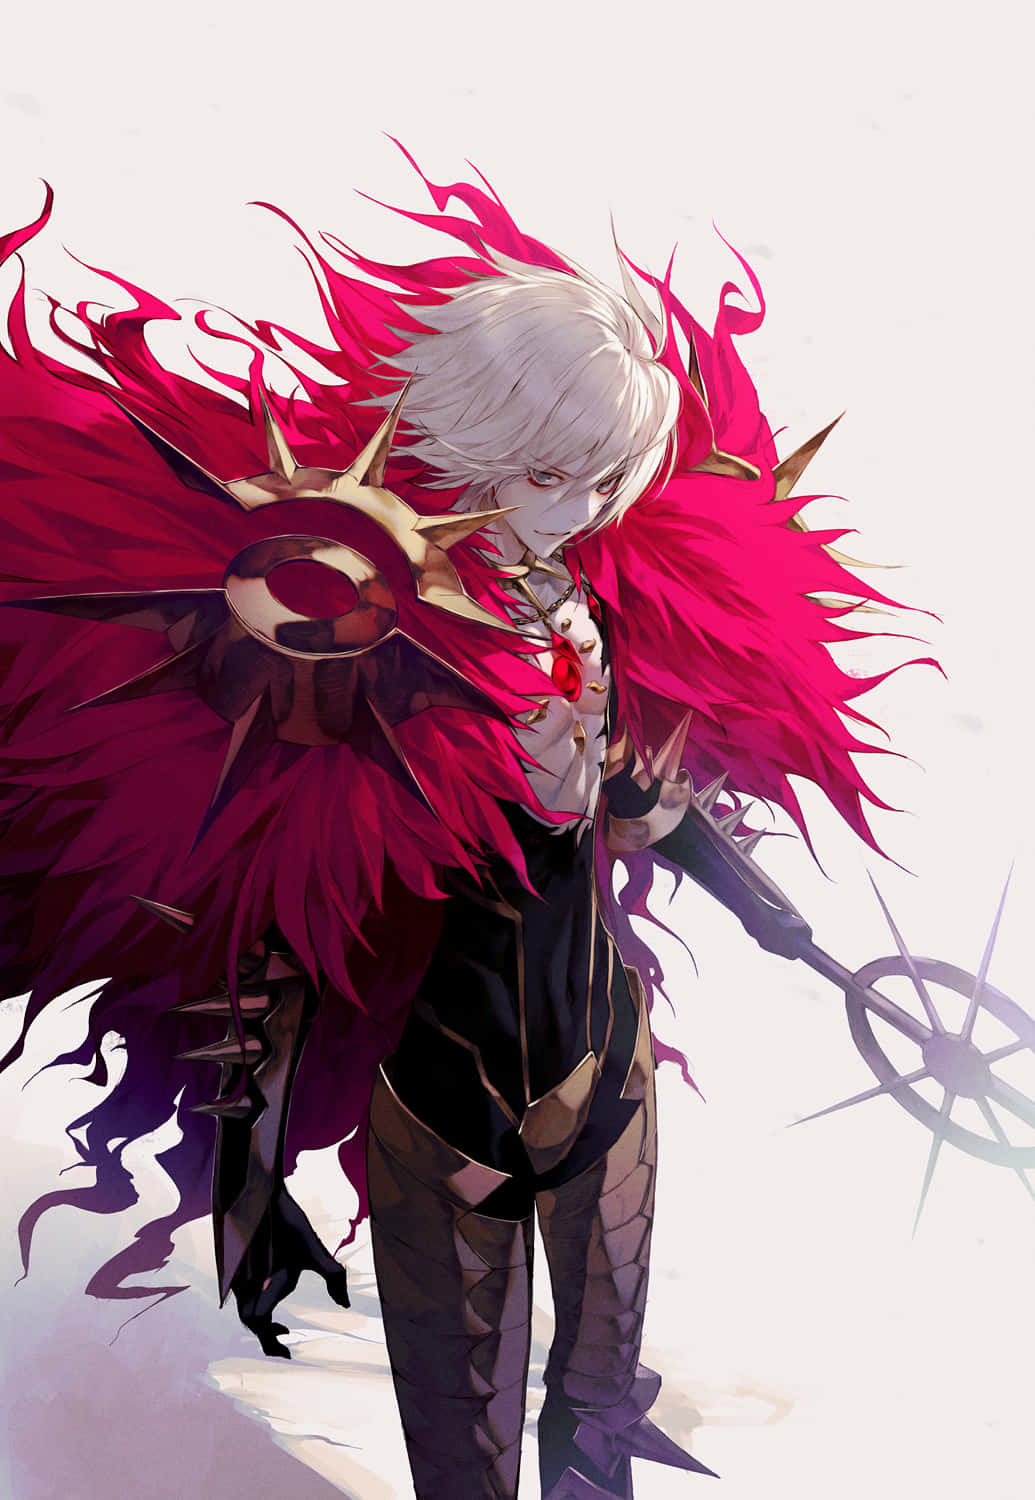 Wallpaper ID: 313567 / Anime Fate/Apocrypha Phone Wallpaper, Karna  (Fate/Apocrypha), Minimalist, Lancer Of Red (Fate/Apocrypha), 1440x3040  free download